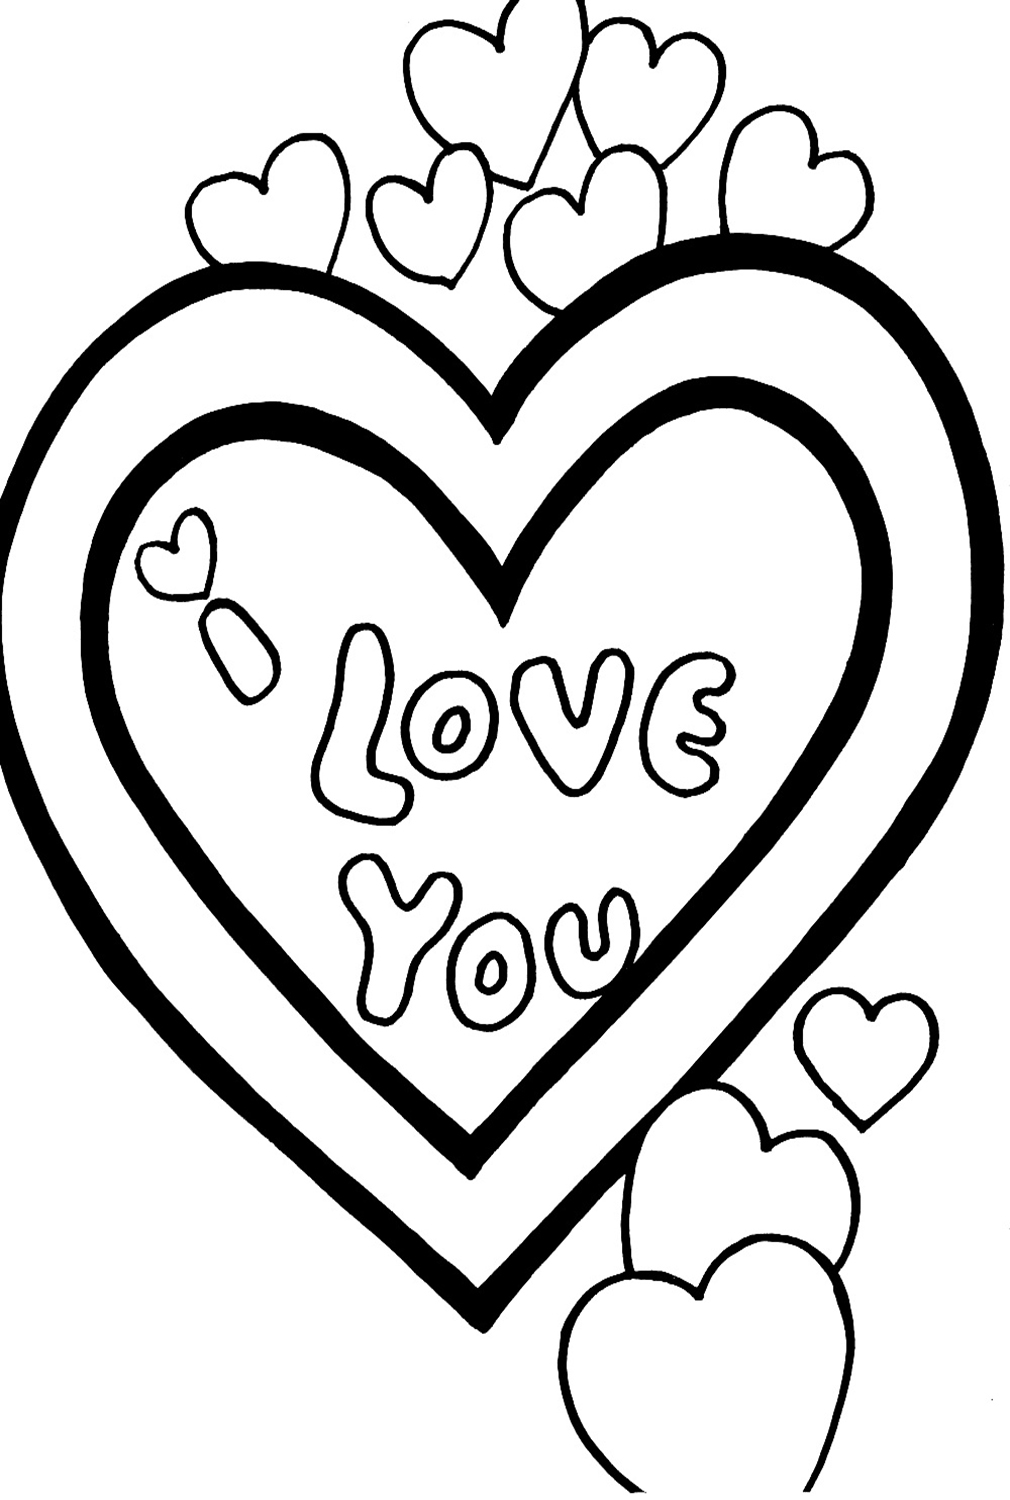 I Love You in Hearts Coloring Page